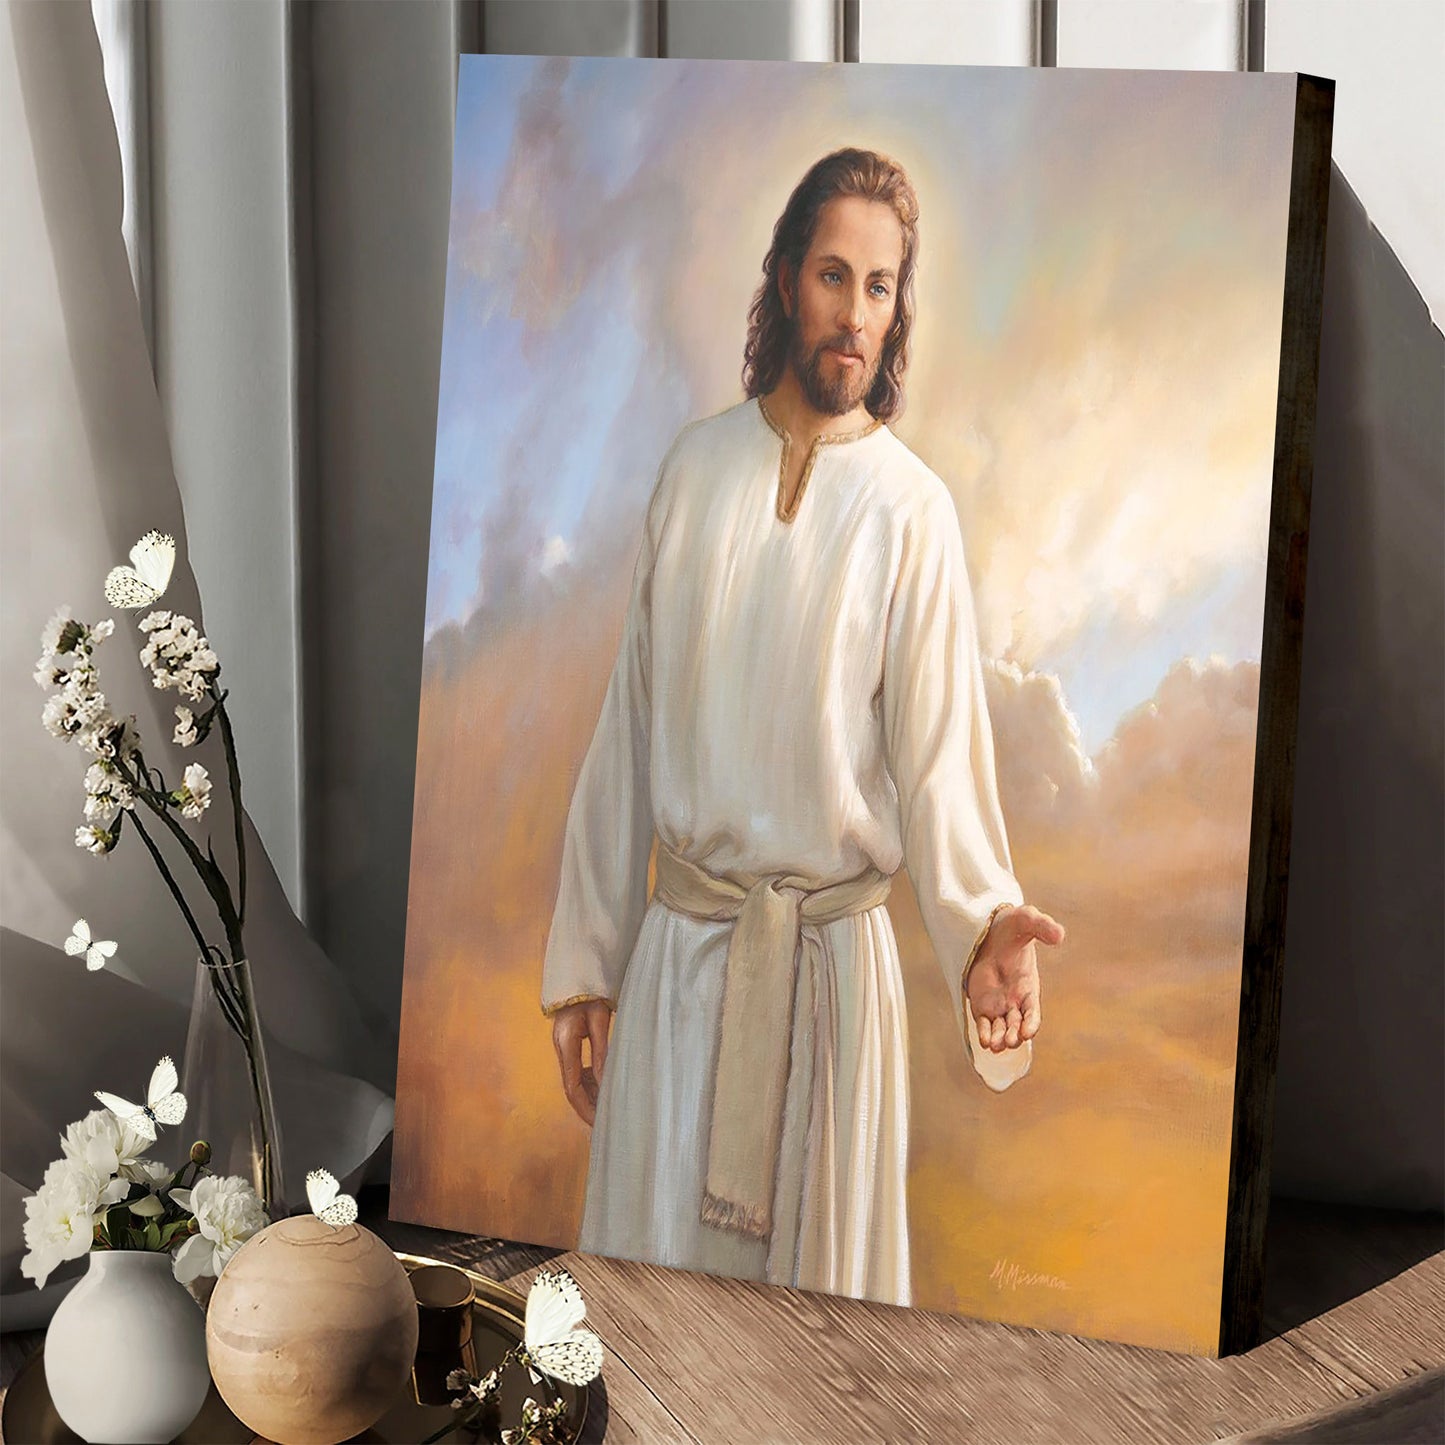 Lord Jesus Christ Canvas Picture - Jesus Christ Canvas Art - Christian Wall Canvas